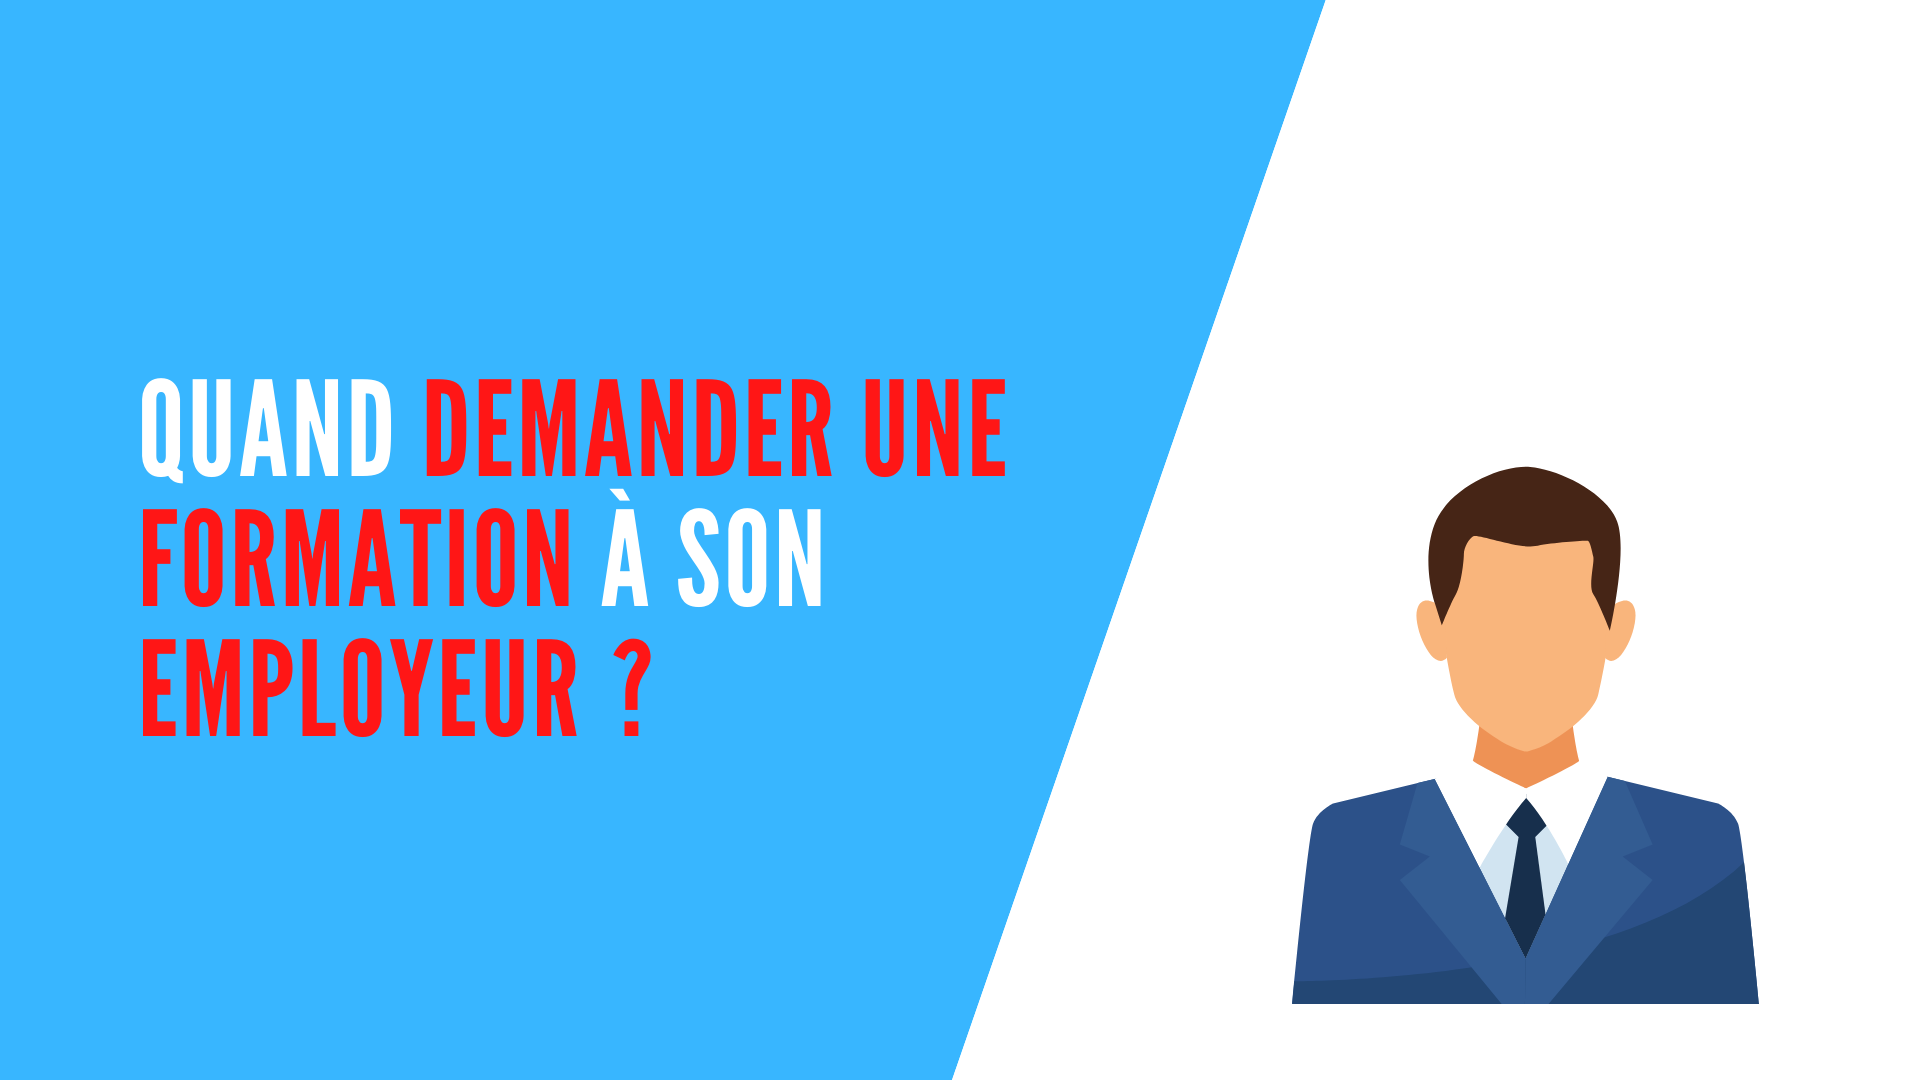 You are currently viewing Quand demander une formation à son employeur ?